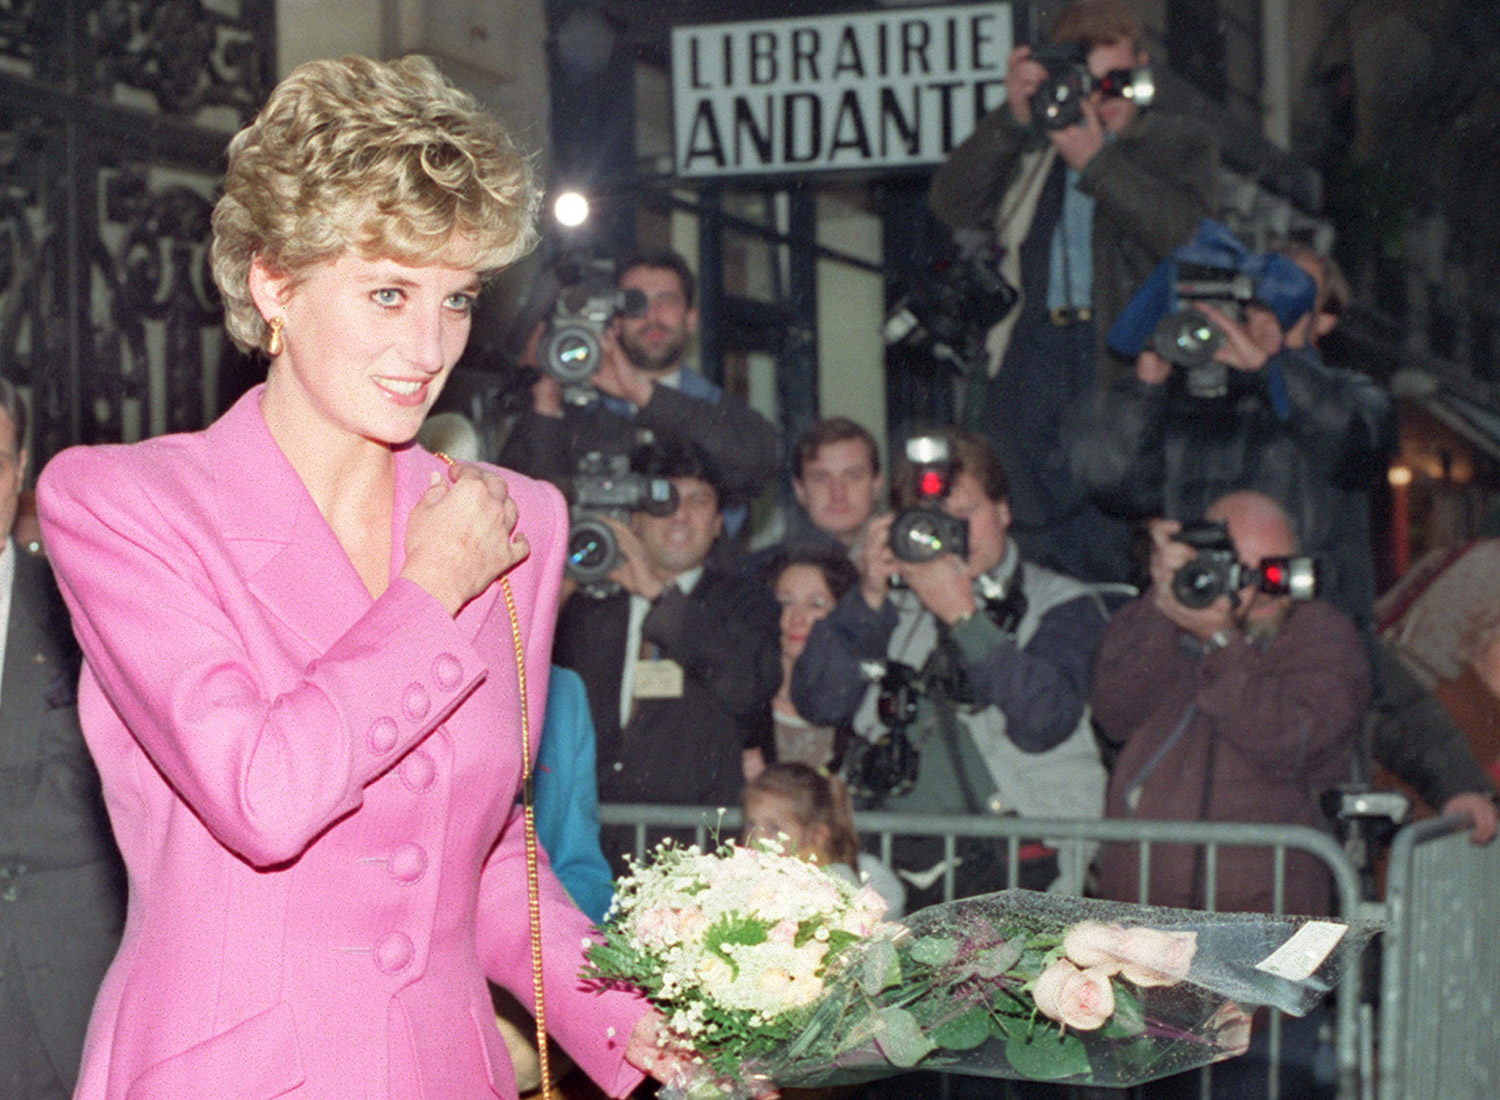 PARIS, FRANCE - NOVEMBER 14: Picture dated 14 November 1992 of Princess Diana leaving the first anti-AIDS bookshop in Paris. Diana, Princess of Wales died in hospital early 31 August after a midnight car crash in central Paris in which her friend the Egyptian millionaire film-producer Dodi al-Fayed and driver were also killed. At the time of the crash, the car was being pursued by paparazzi press photographers on motorcycles. (Photo credit should read VINCENT AMALVY/AFP via Getty Images)